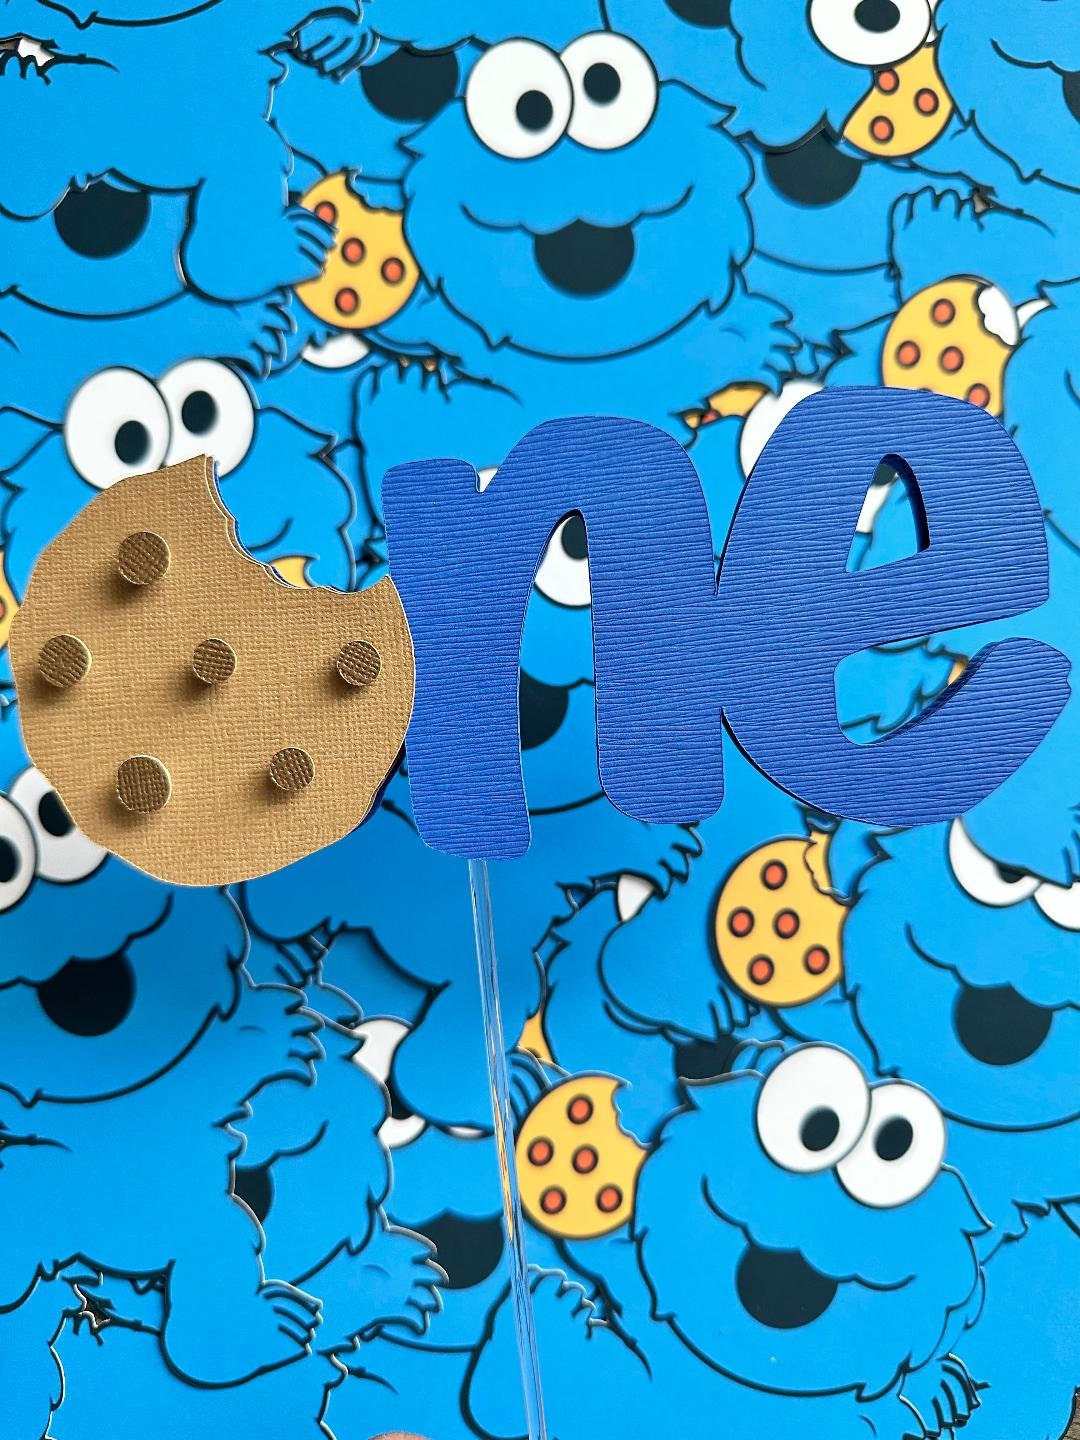 Cookie Monster Inspired Treat Box, One Tough Cookie Gable Box, Sesame  Street Favor Bag, Cookie Monster Party Decorations, Birthday Treatbox 